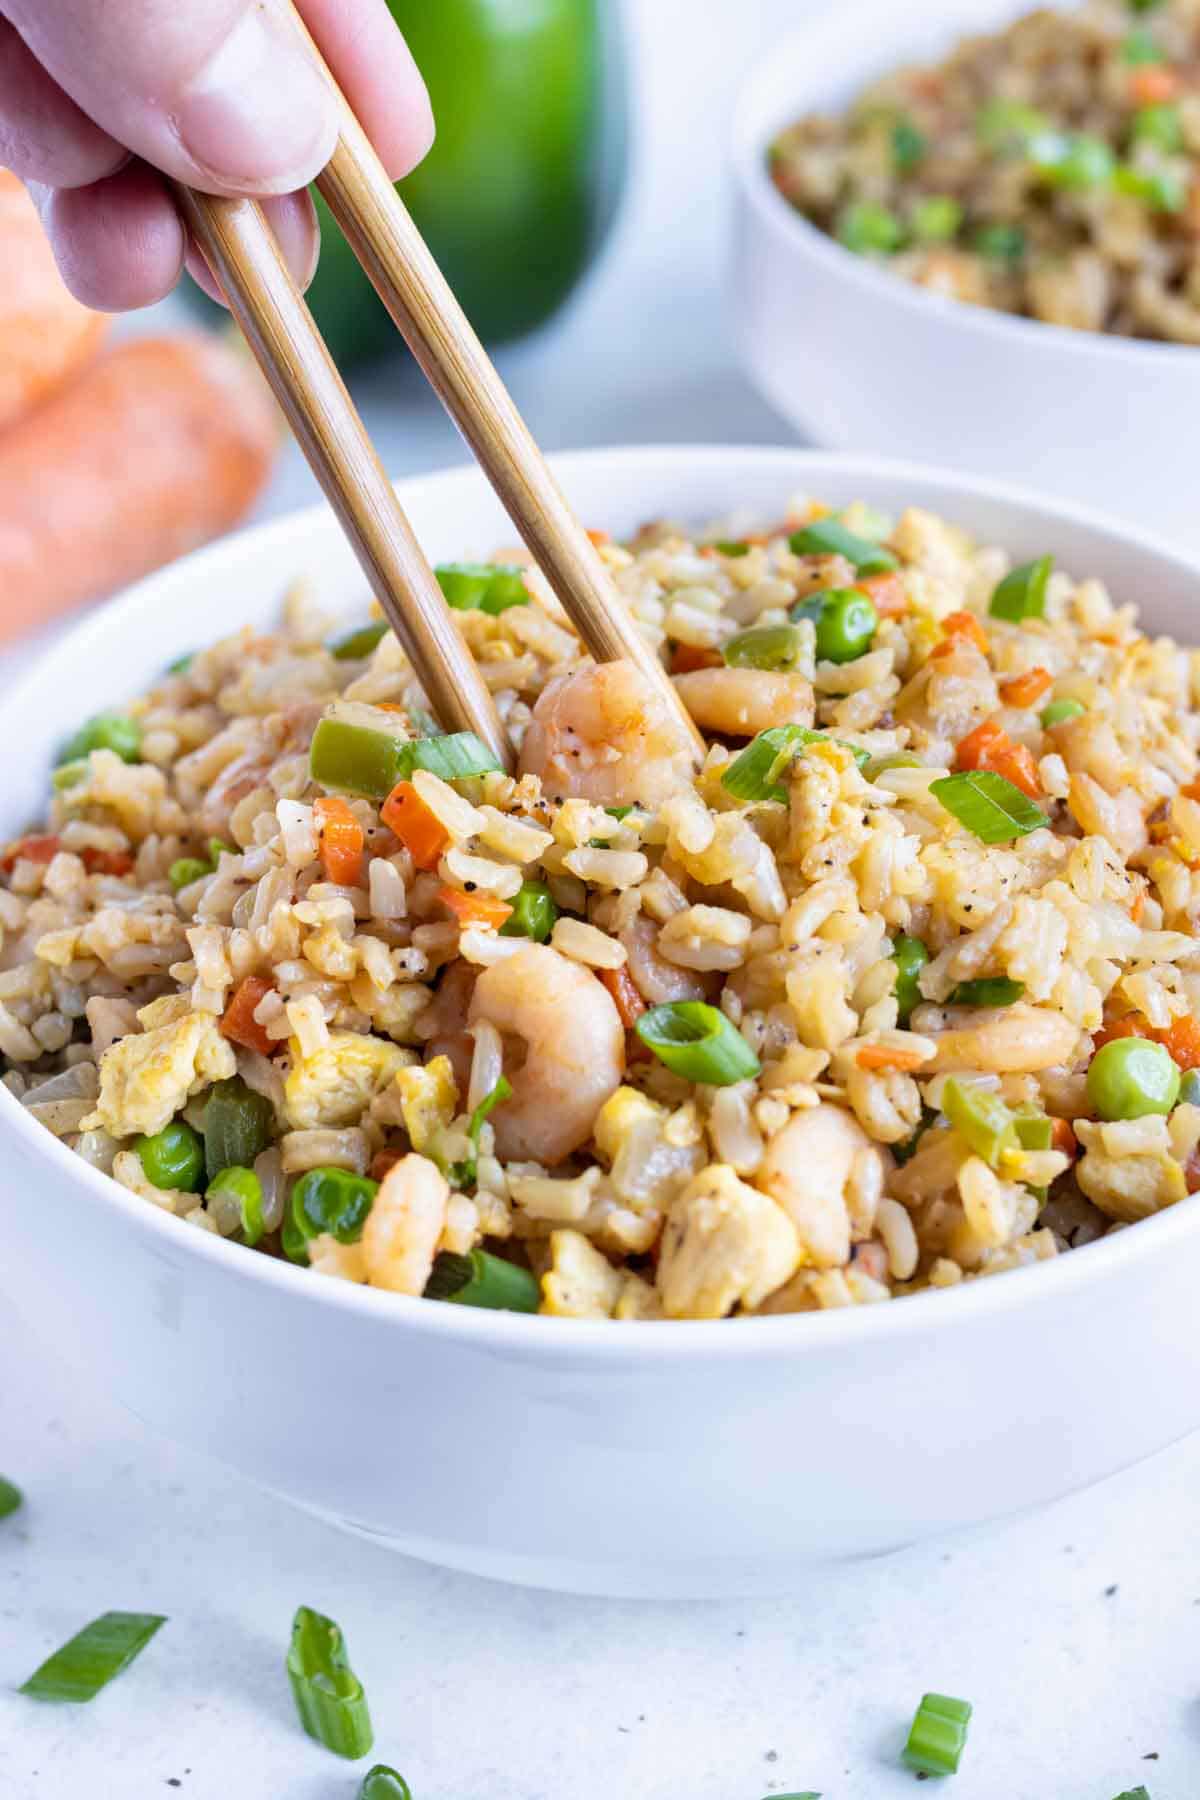 A piece of shrimp is picked up with chopsticks from a bowl of fried rice.